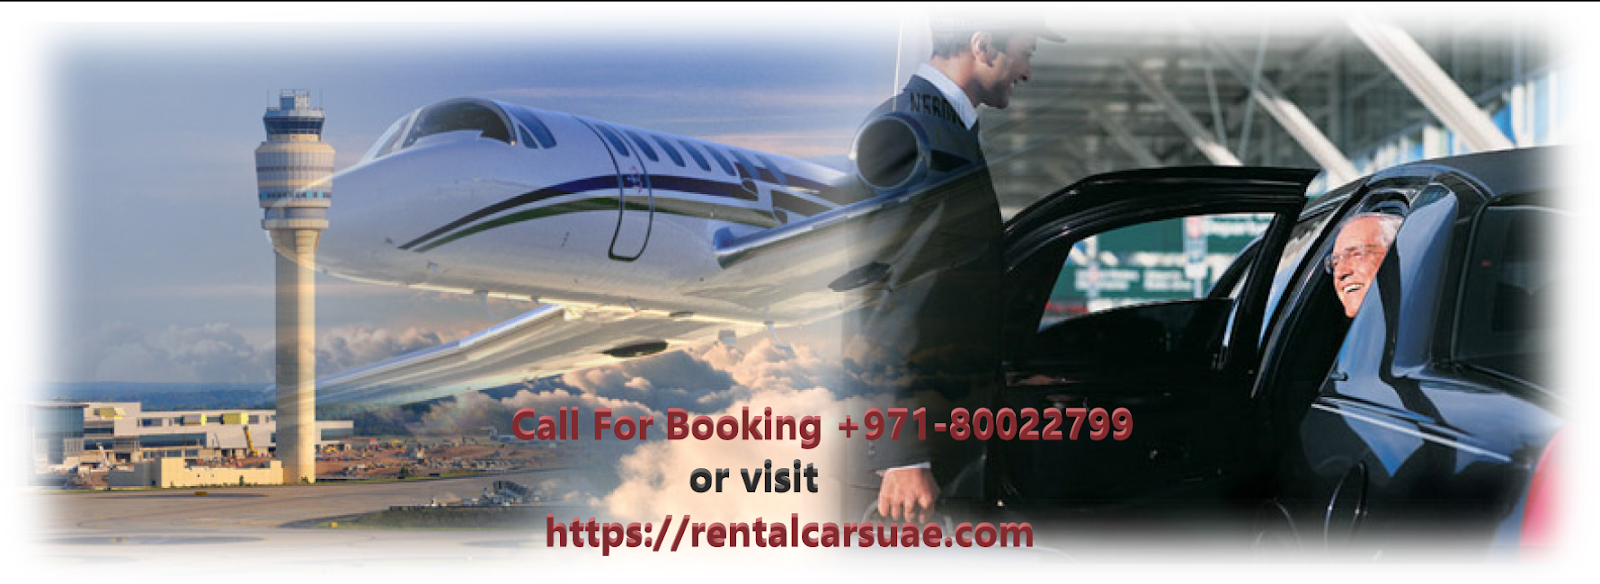 Cheapest Rent A Car DubaiSterling rent a car is based in Dubai and provides Cheapest car rental and hire services throughout the UAE . We have the right aim to -  Practically we all need...